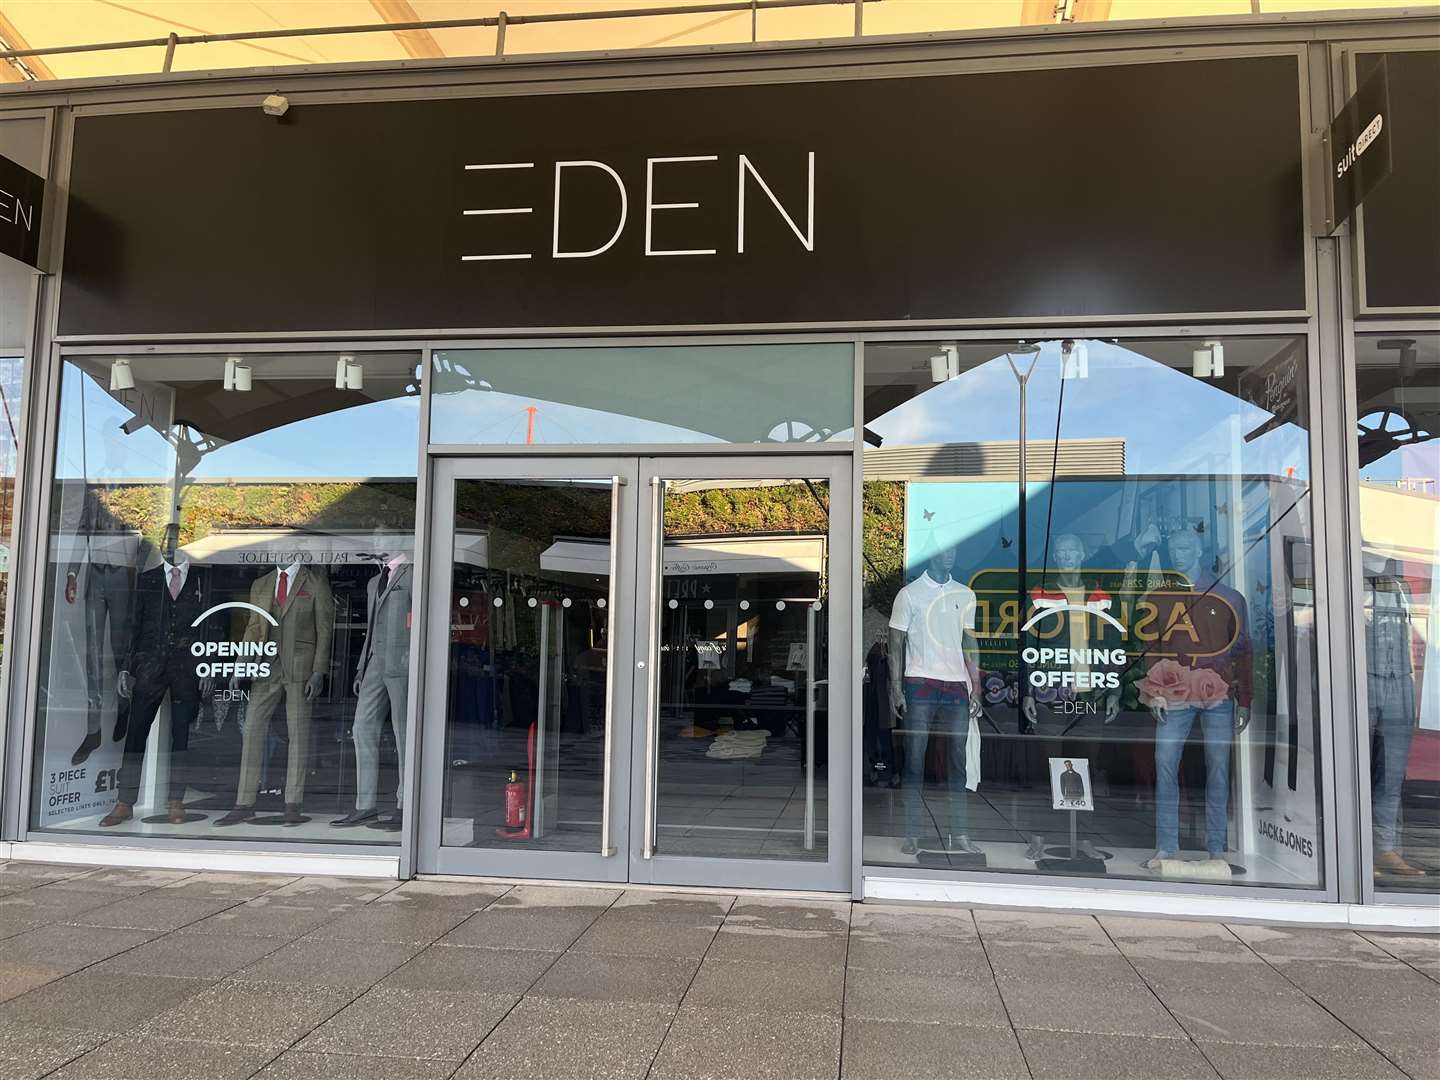 EDEN is a menswear outlet store which sells suits, casual attire and footwear from top brands